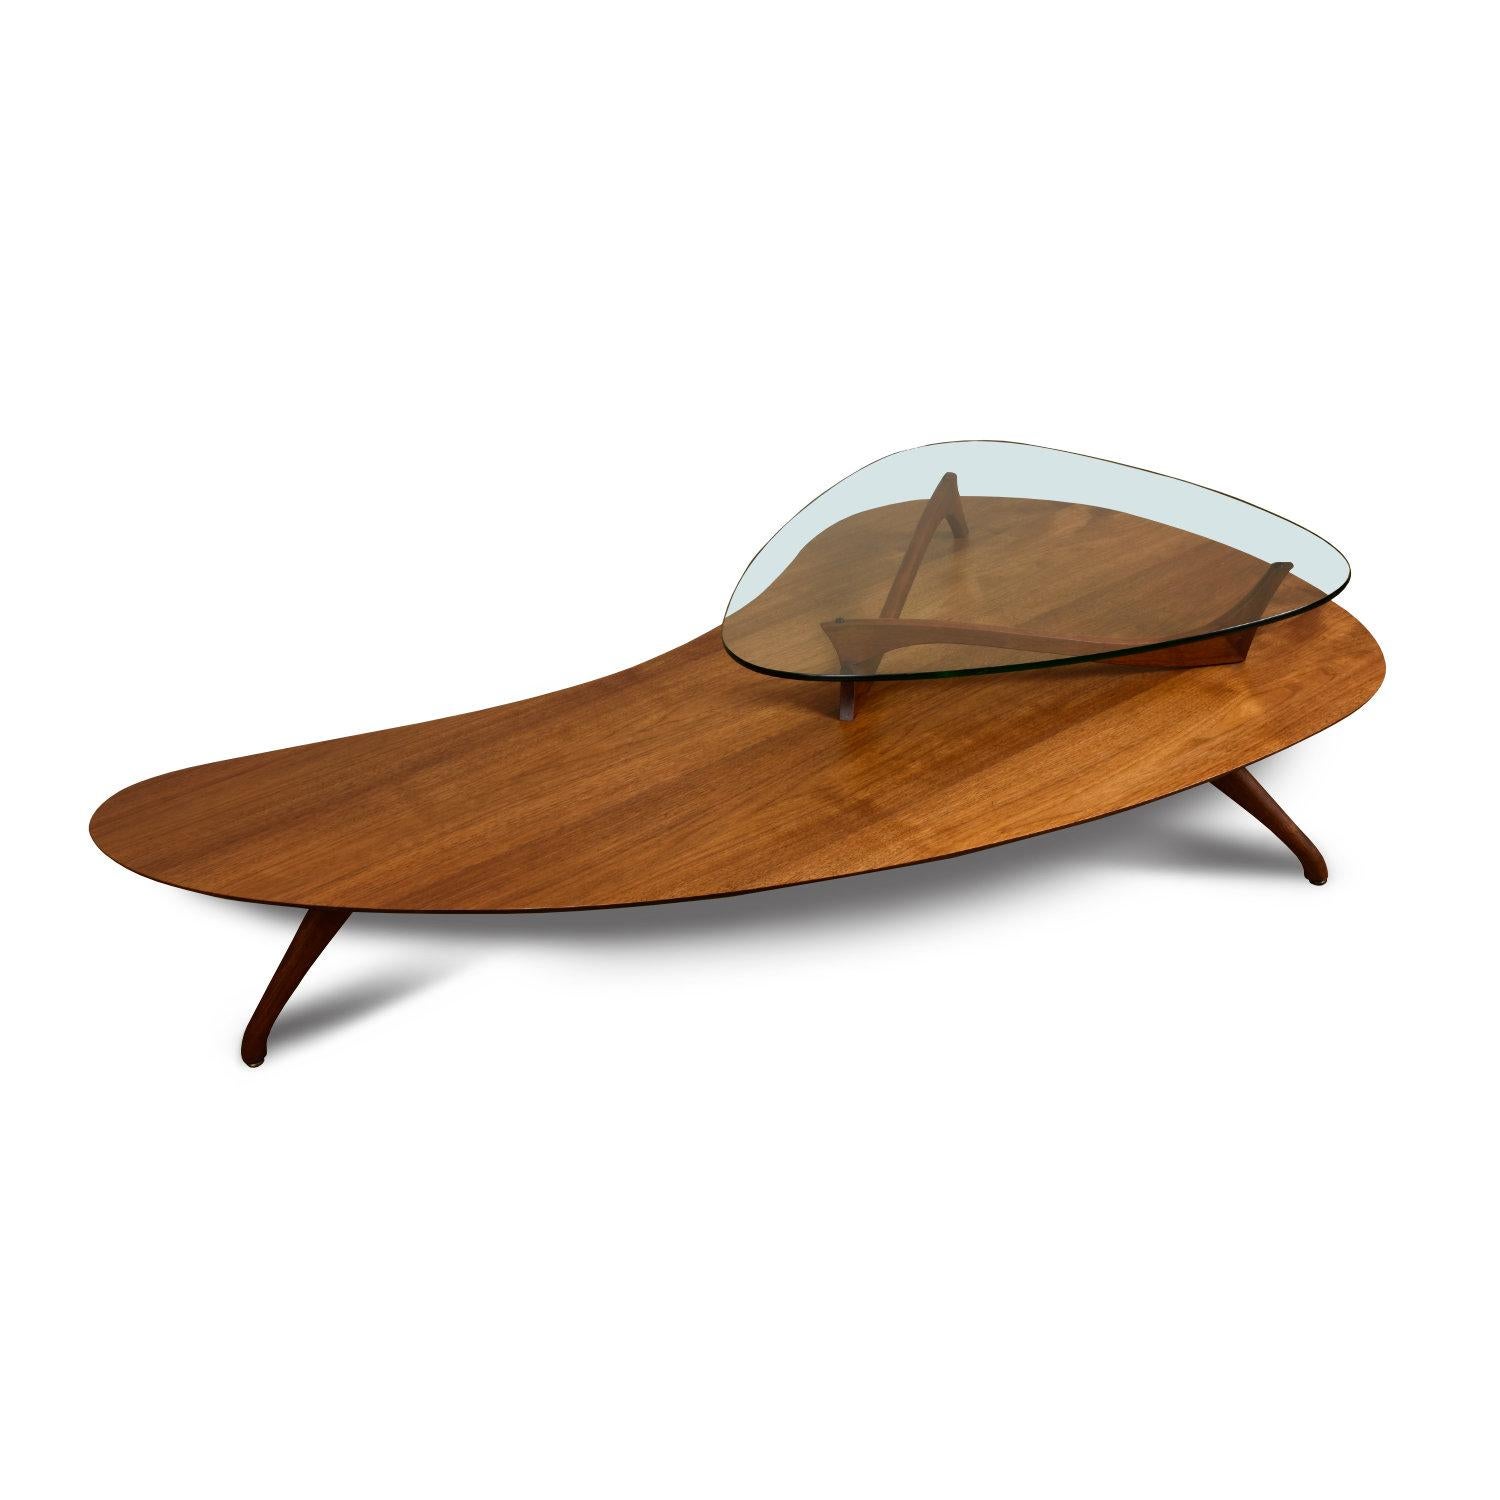 Outstanding amorphic two-tier Mid-Century Modern boomerang coffee table. This fabulous table is exhibits absolutely exquisite styling and quality. Our restoration team fully disassembled this piece to refinish the walnut wood, breathing new life